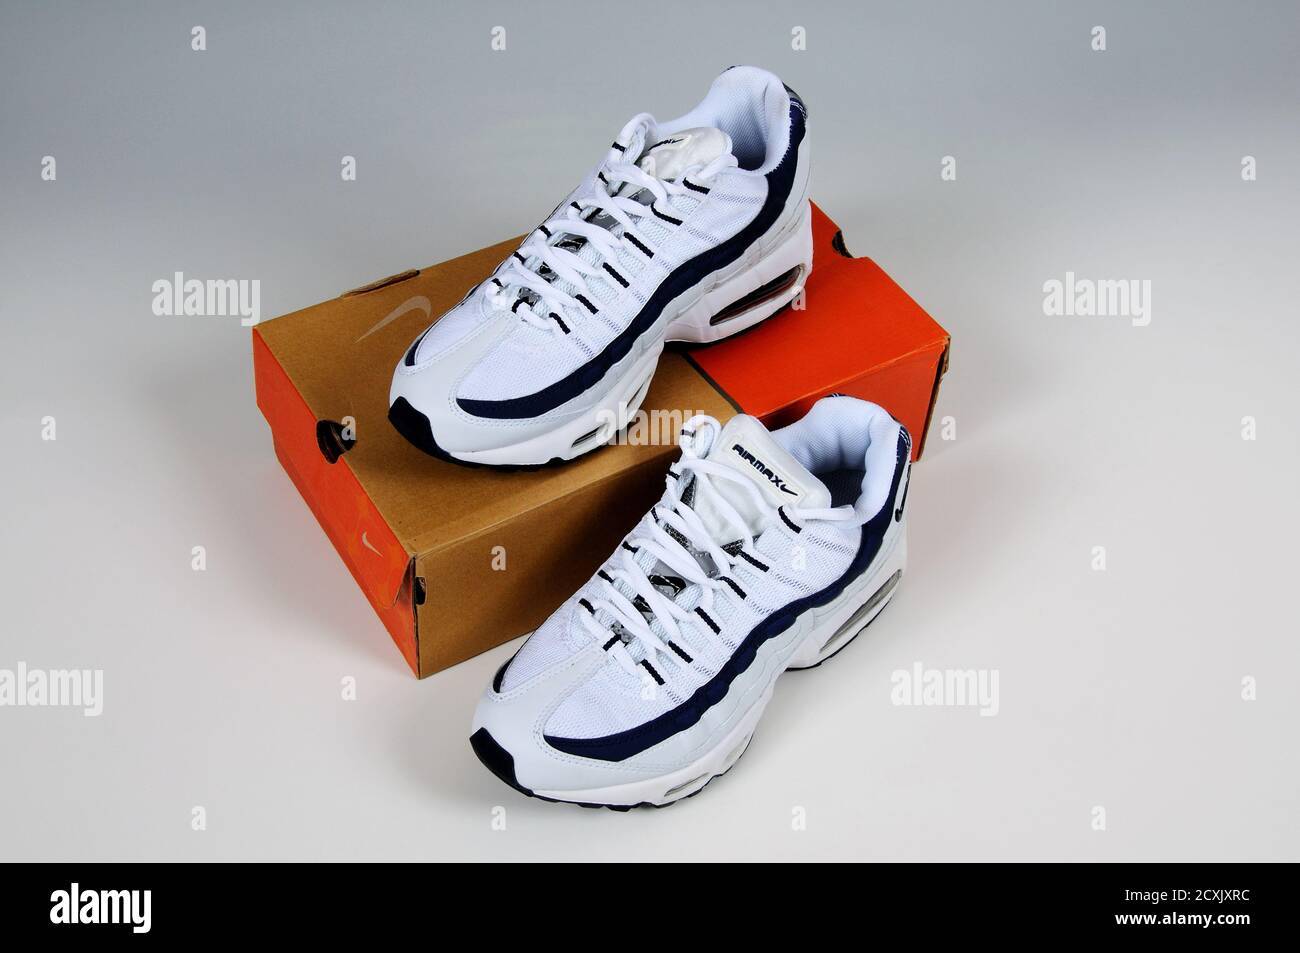 Nike Shoe Box High Resolution Stock Photography and Images - Alamy